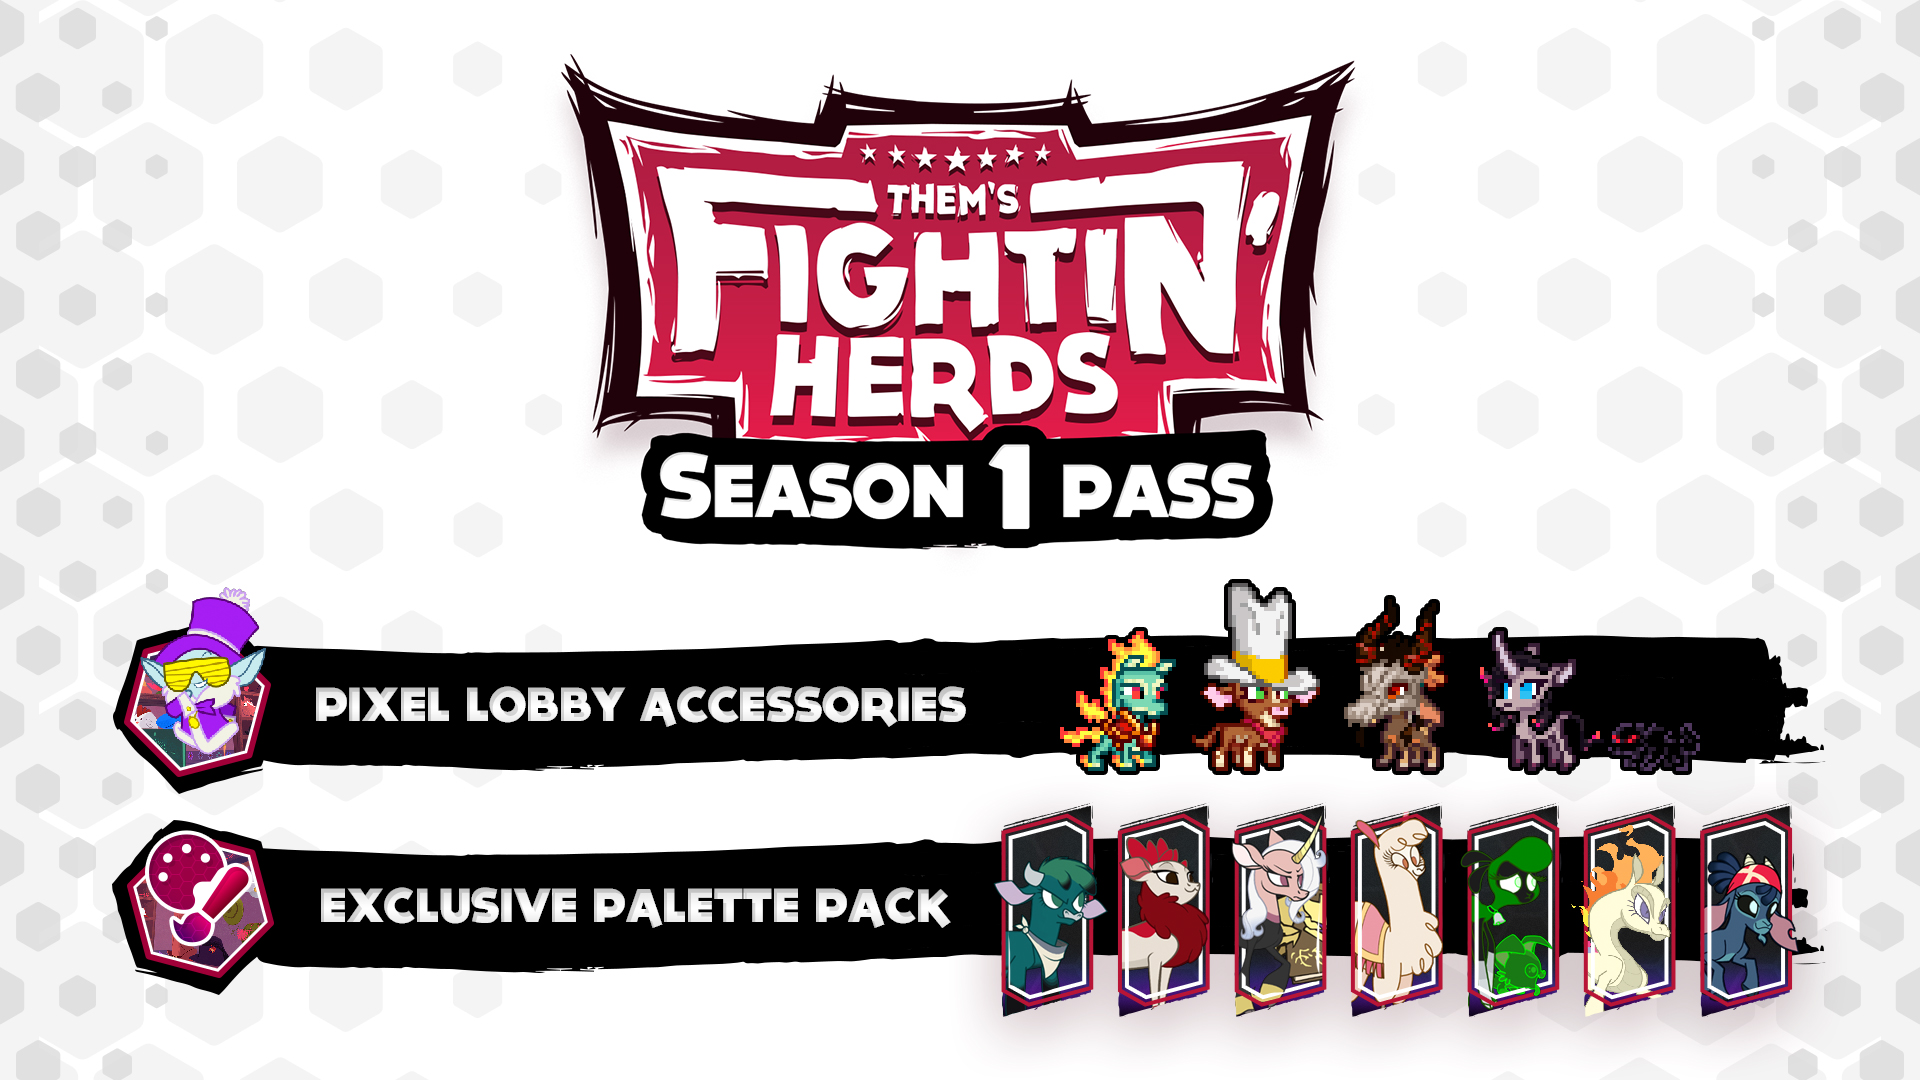 Season 1 Pass - Palette Pack and Pixel Lobby Accessories